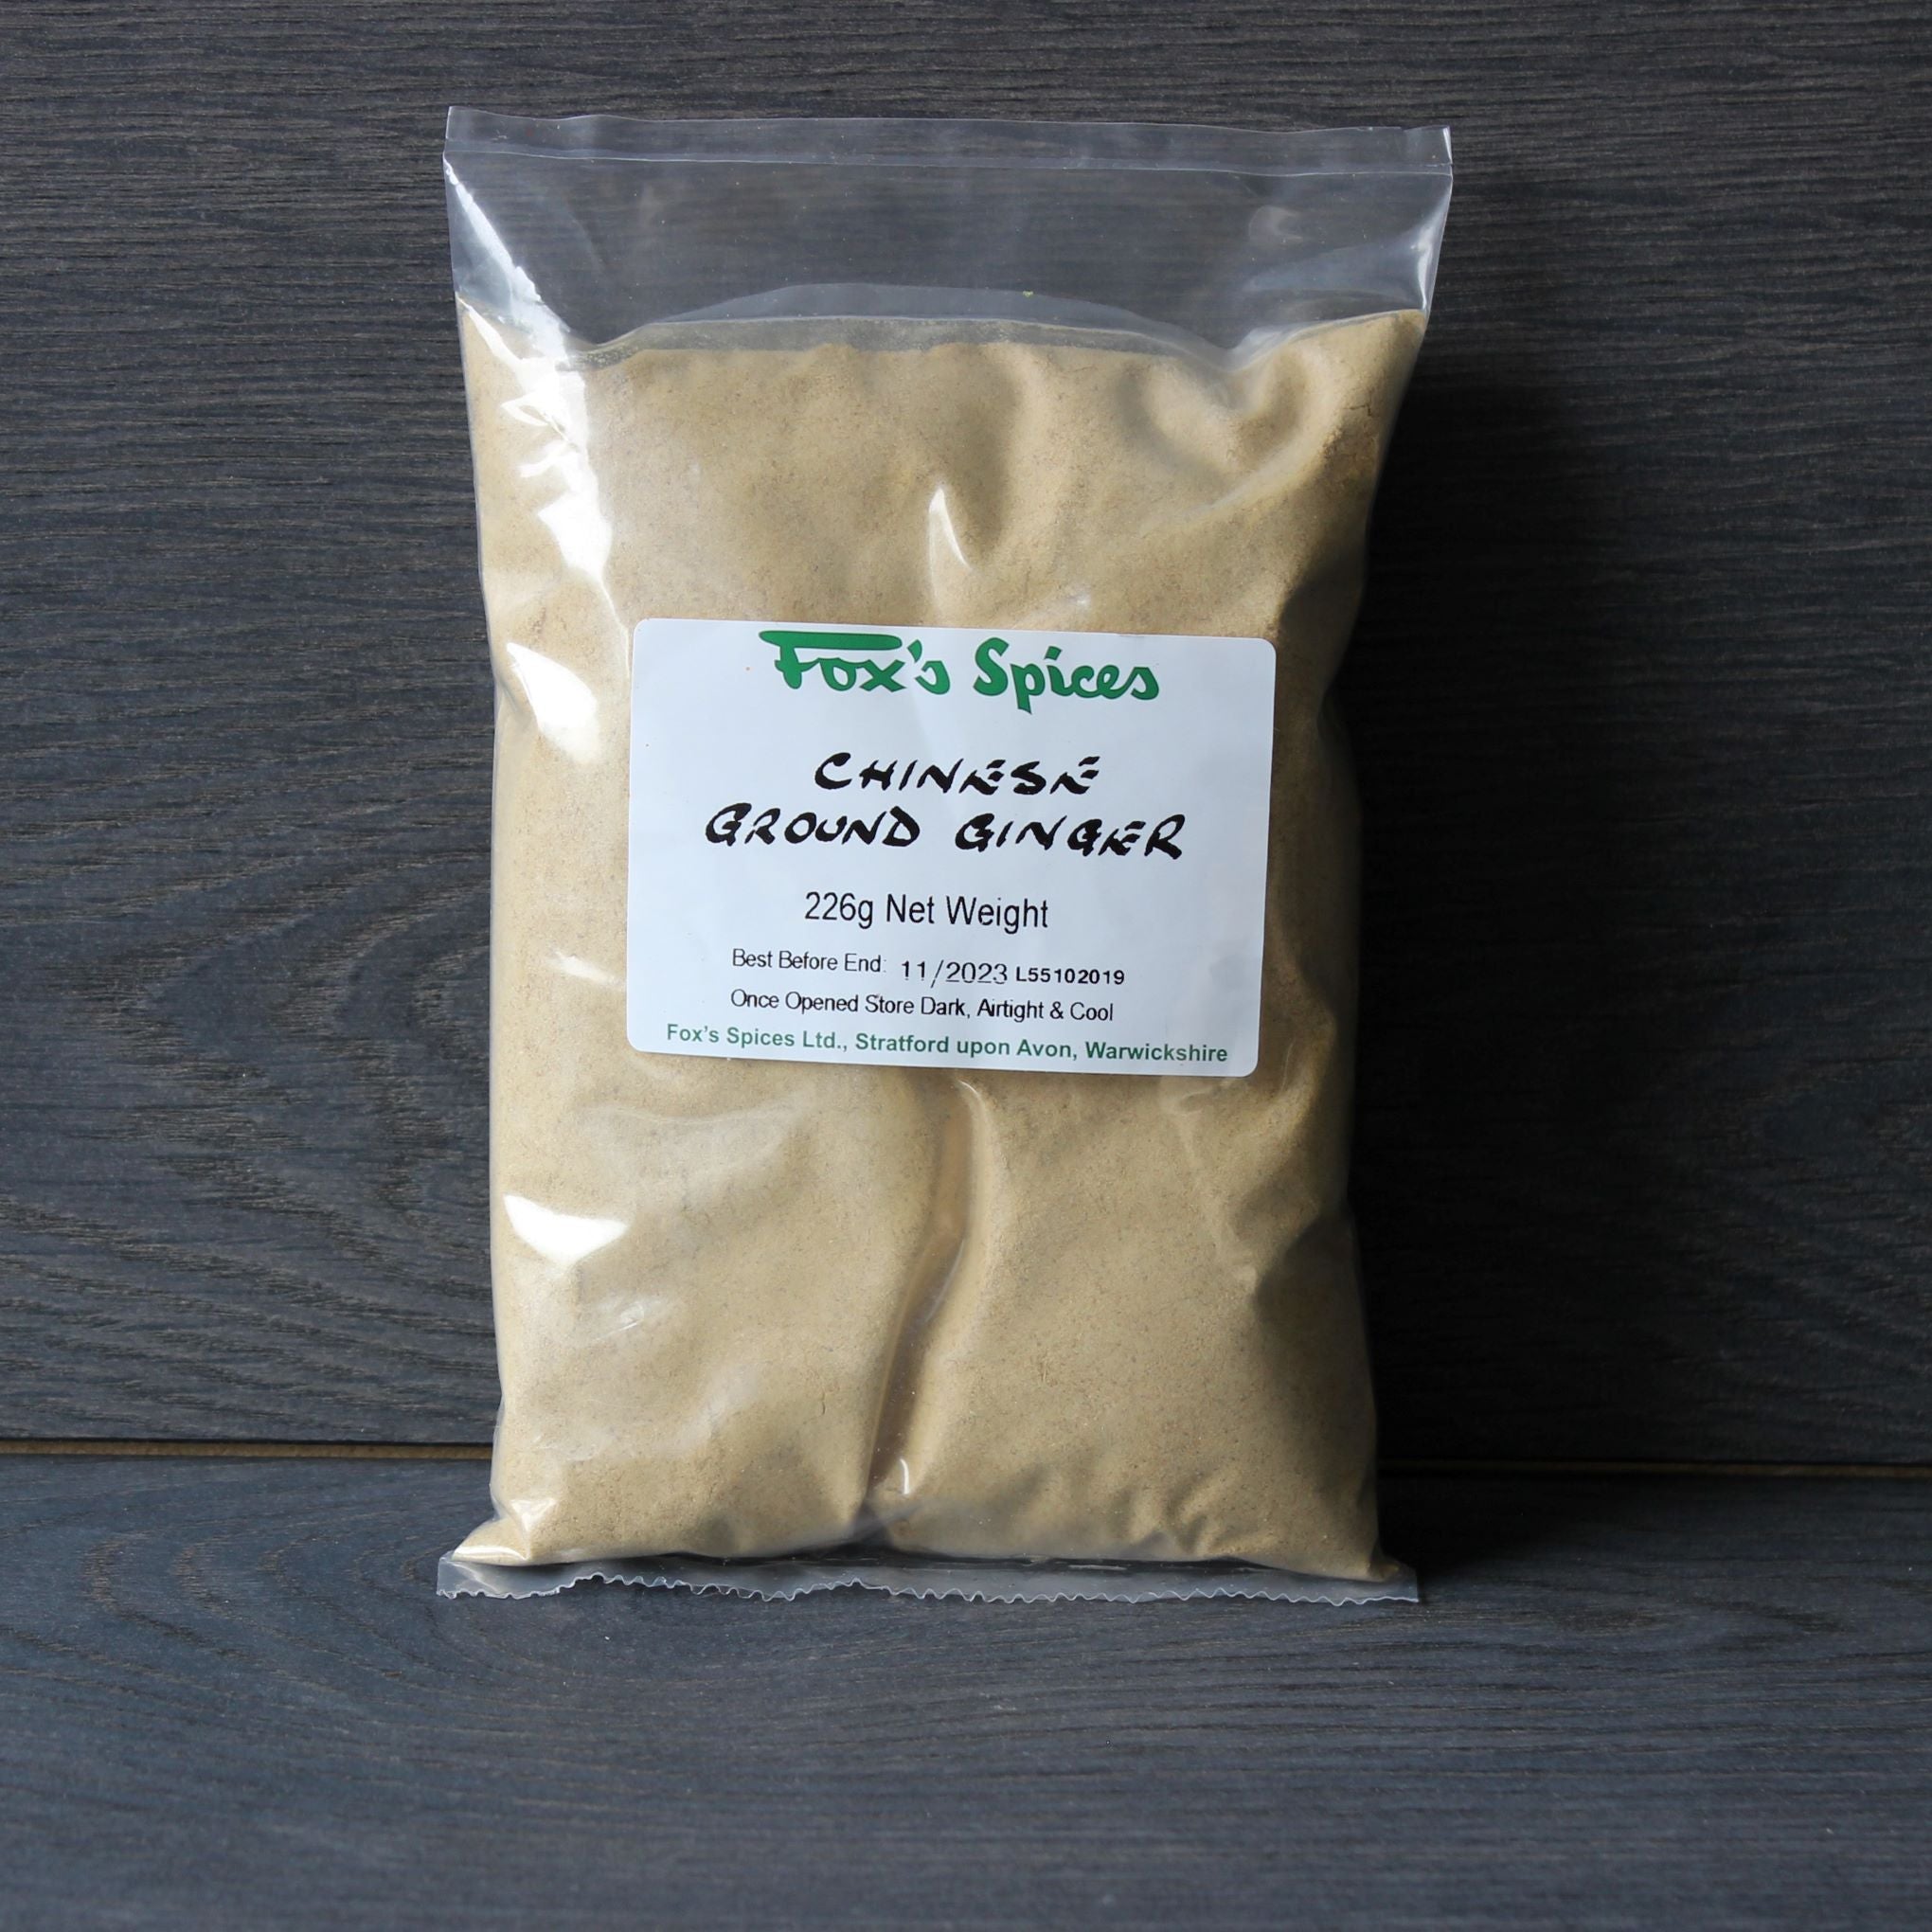 Fox's Spices supplied this 226g bag of ground ginger.